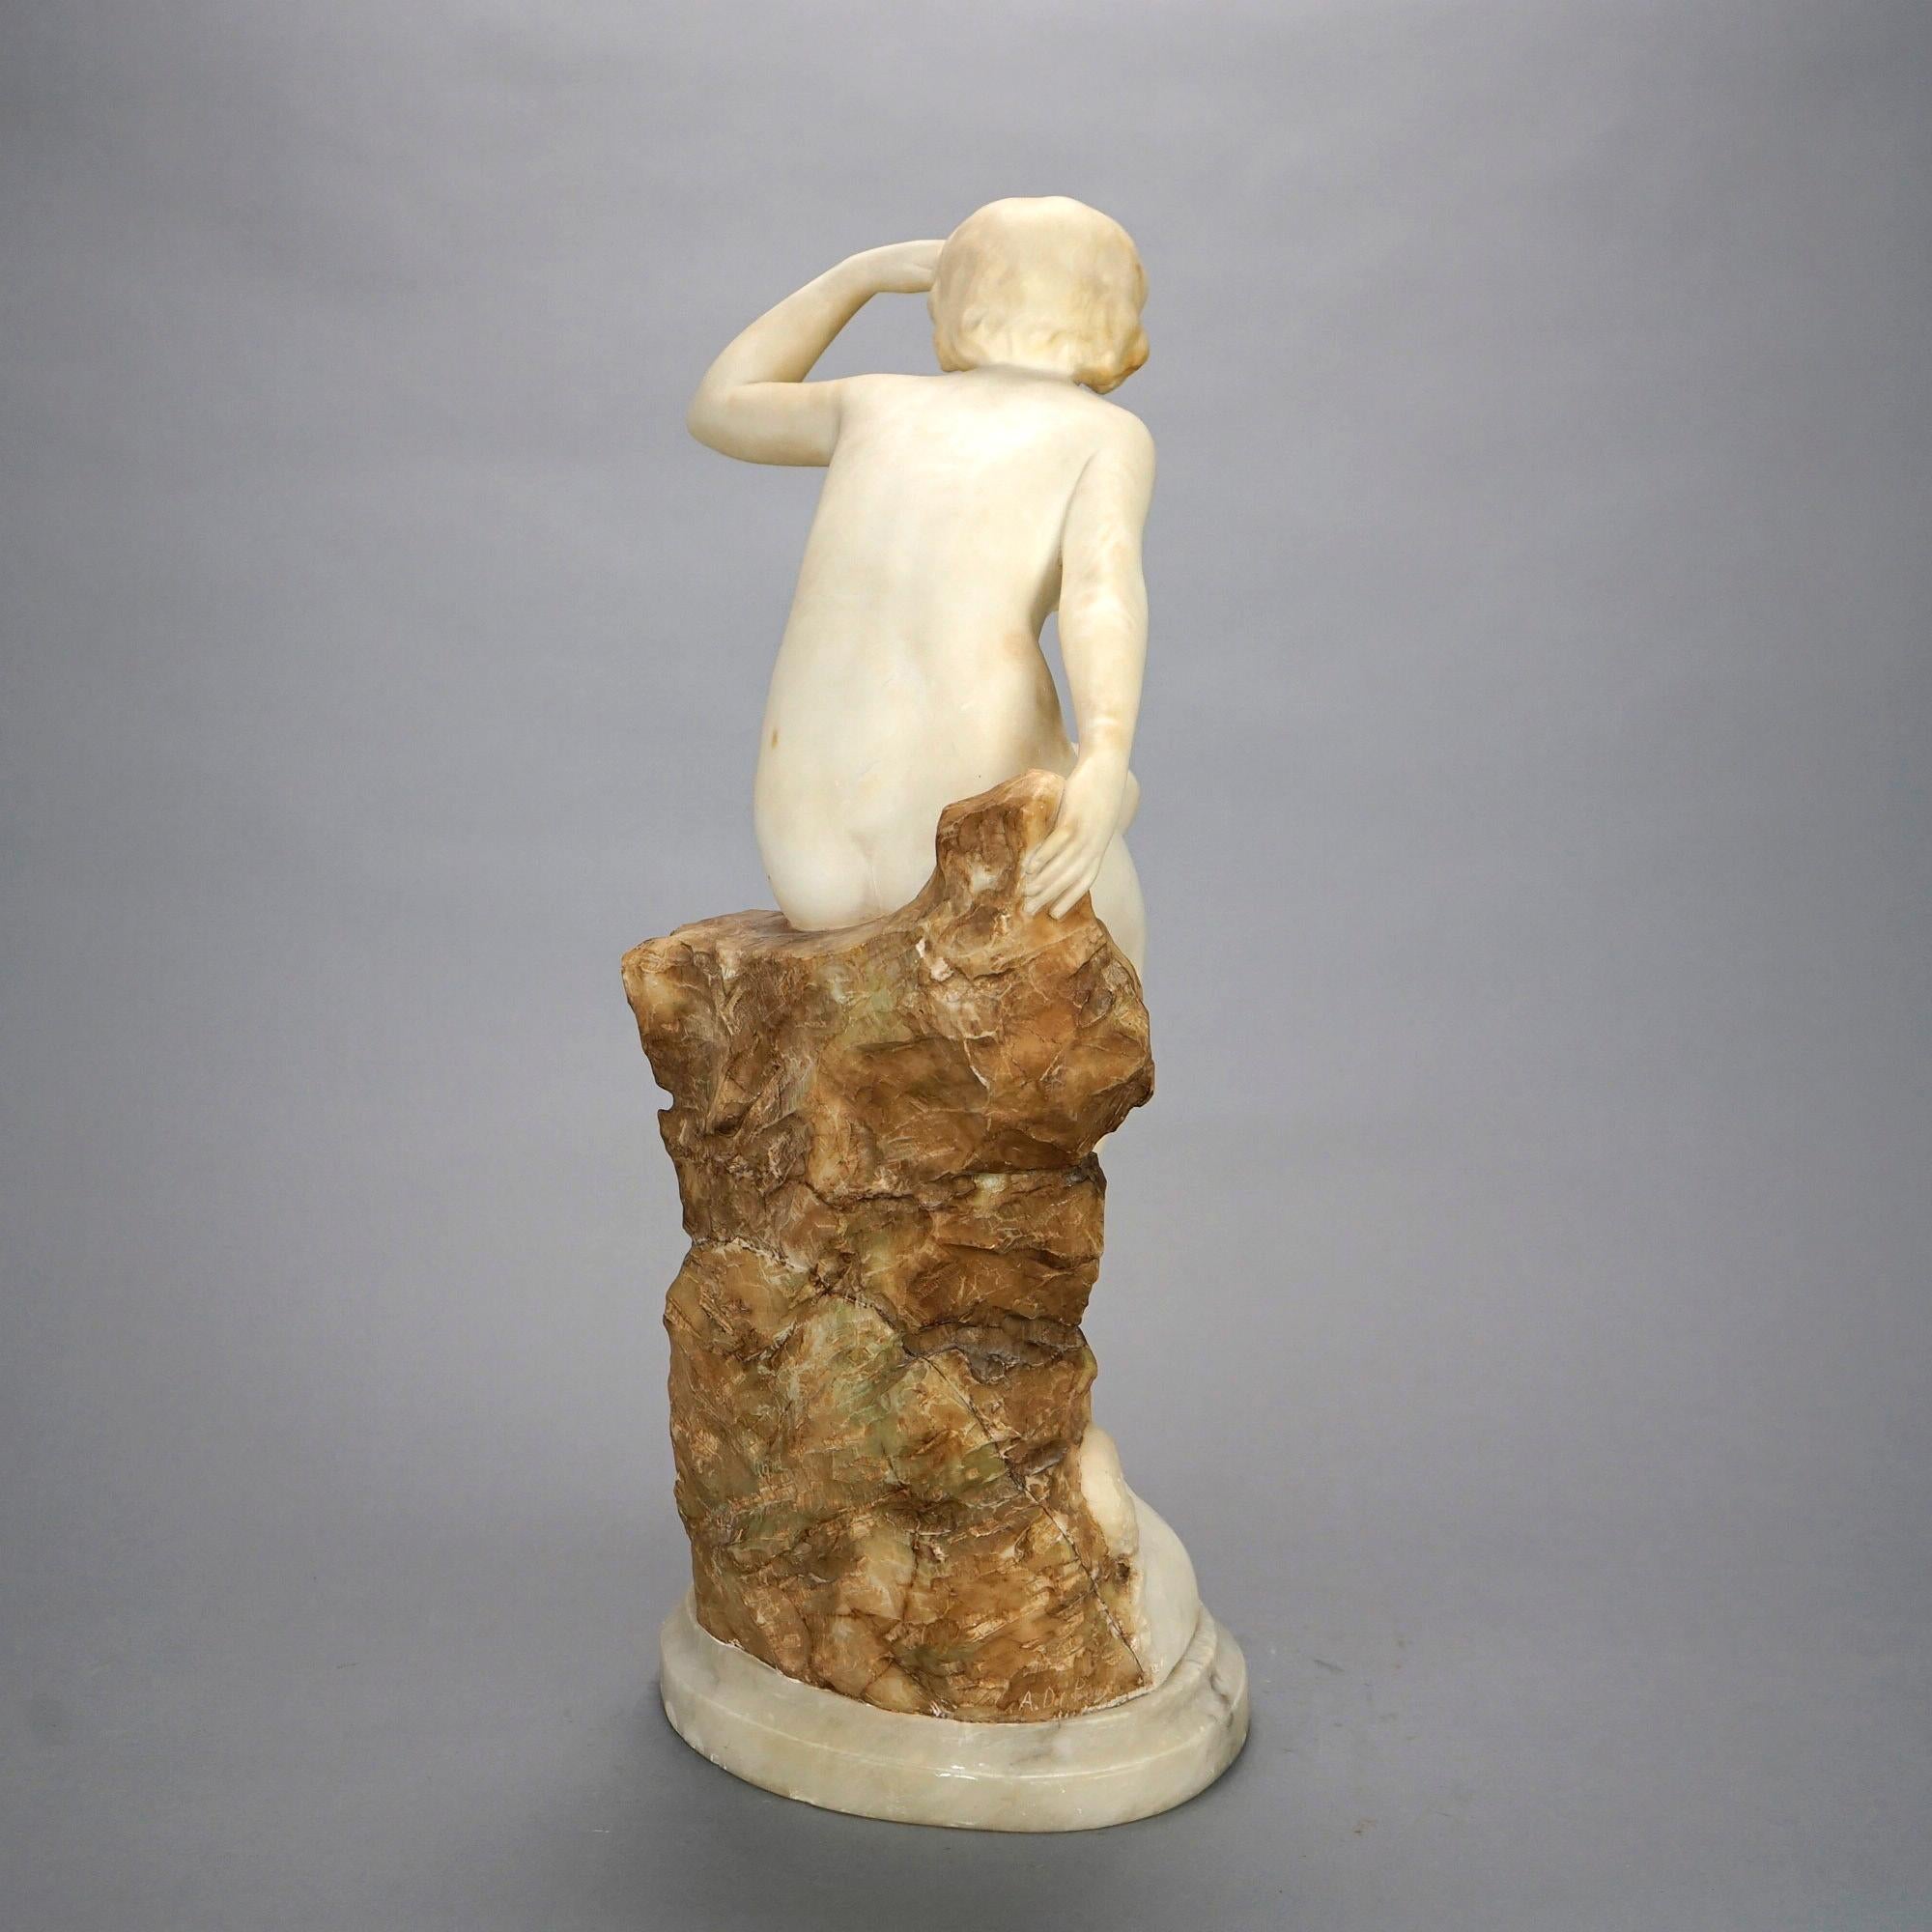 20th Century Antique Alabaster Sculpture of a Woman Seaside, Signed A. Del Perugia, c1900